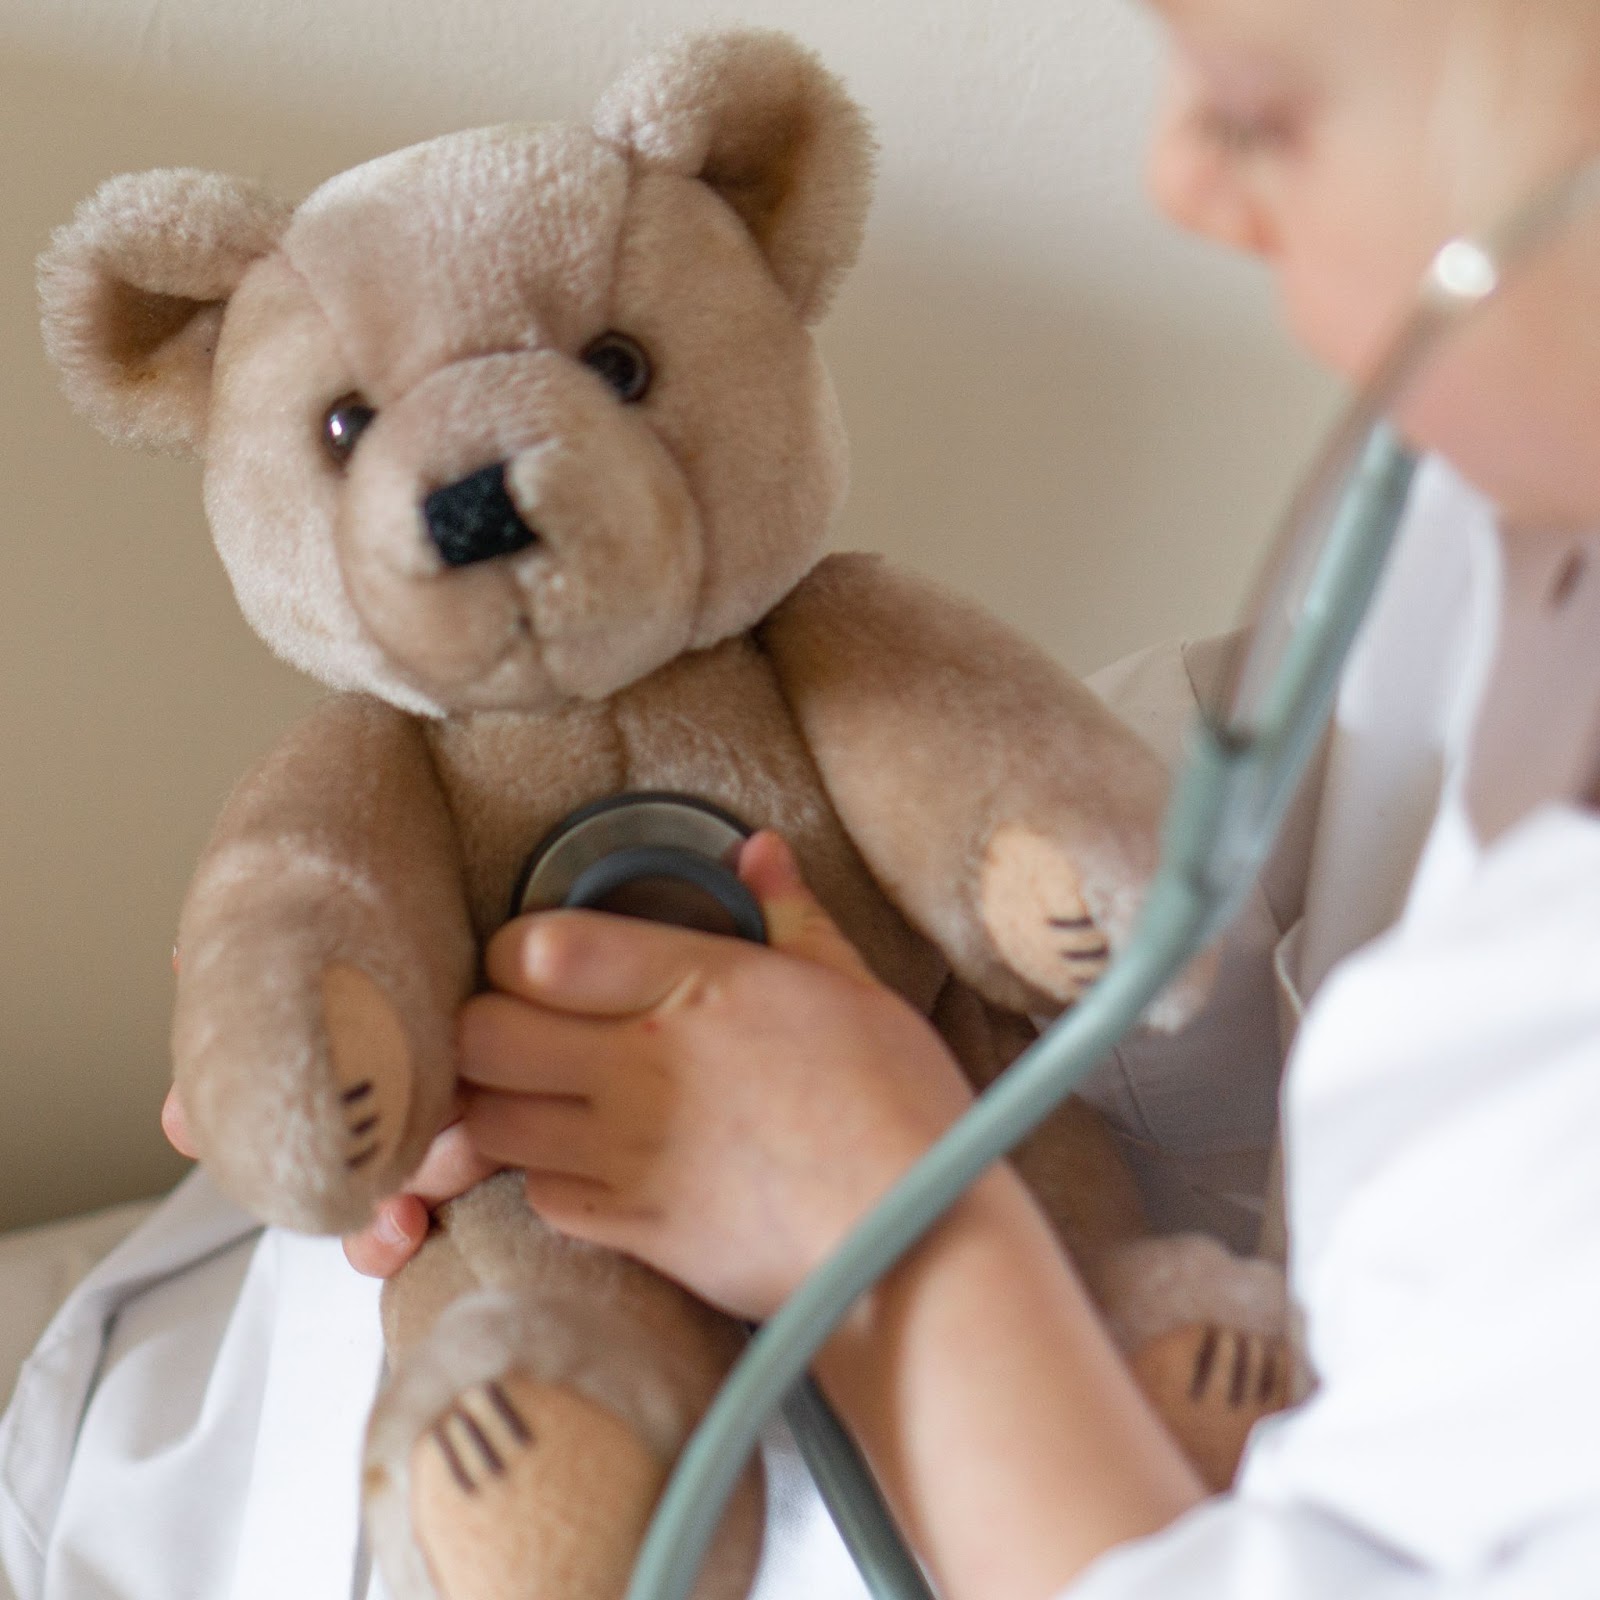 kid giving teddy bear a checkup, imagination, play doctor, role playing